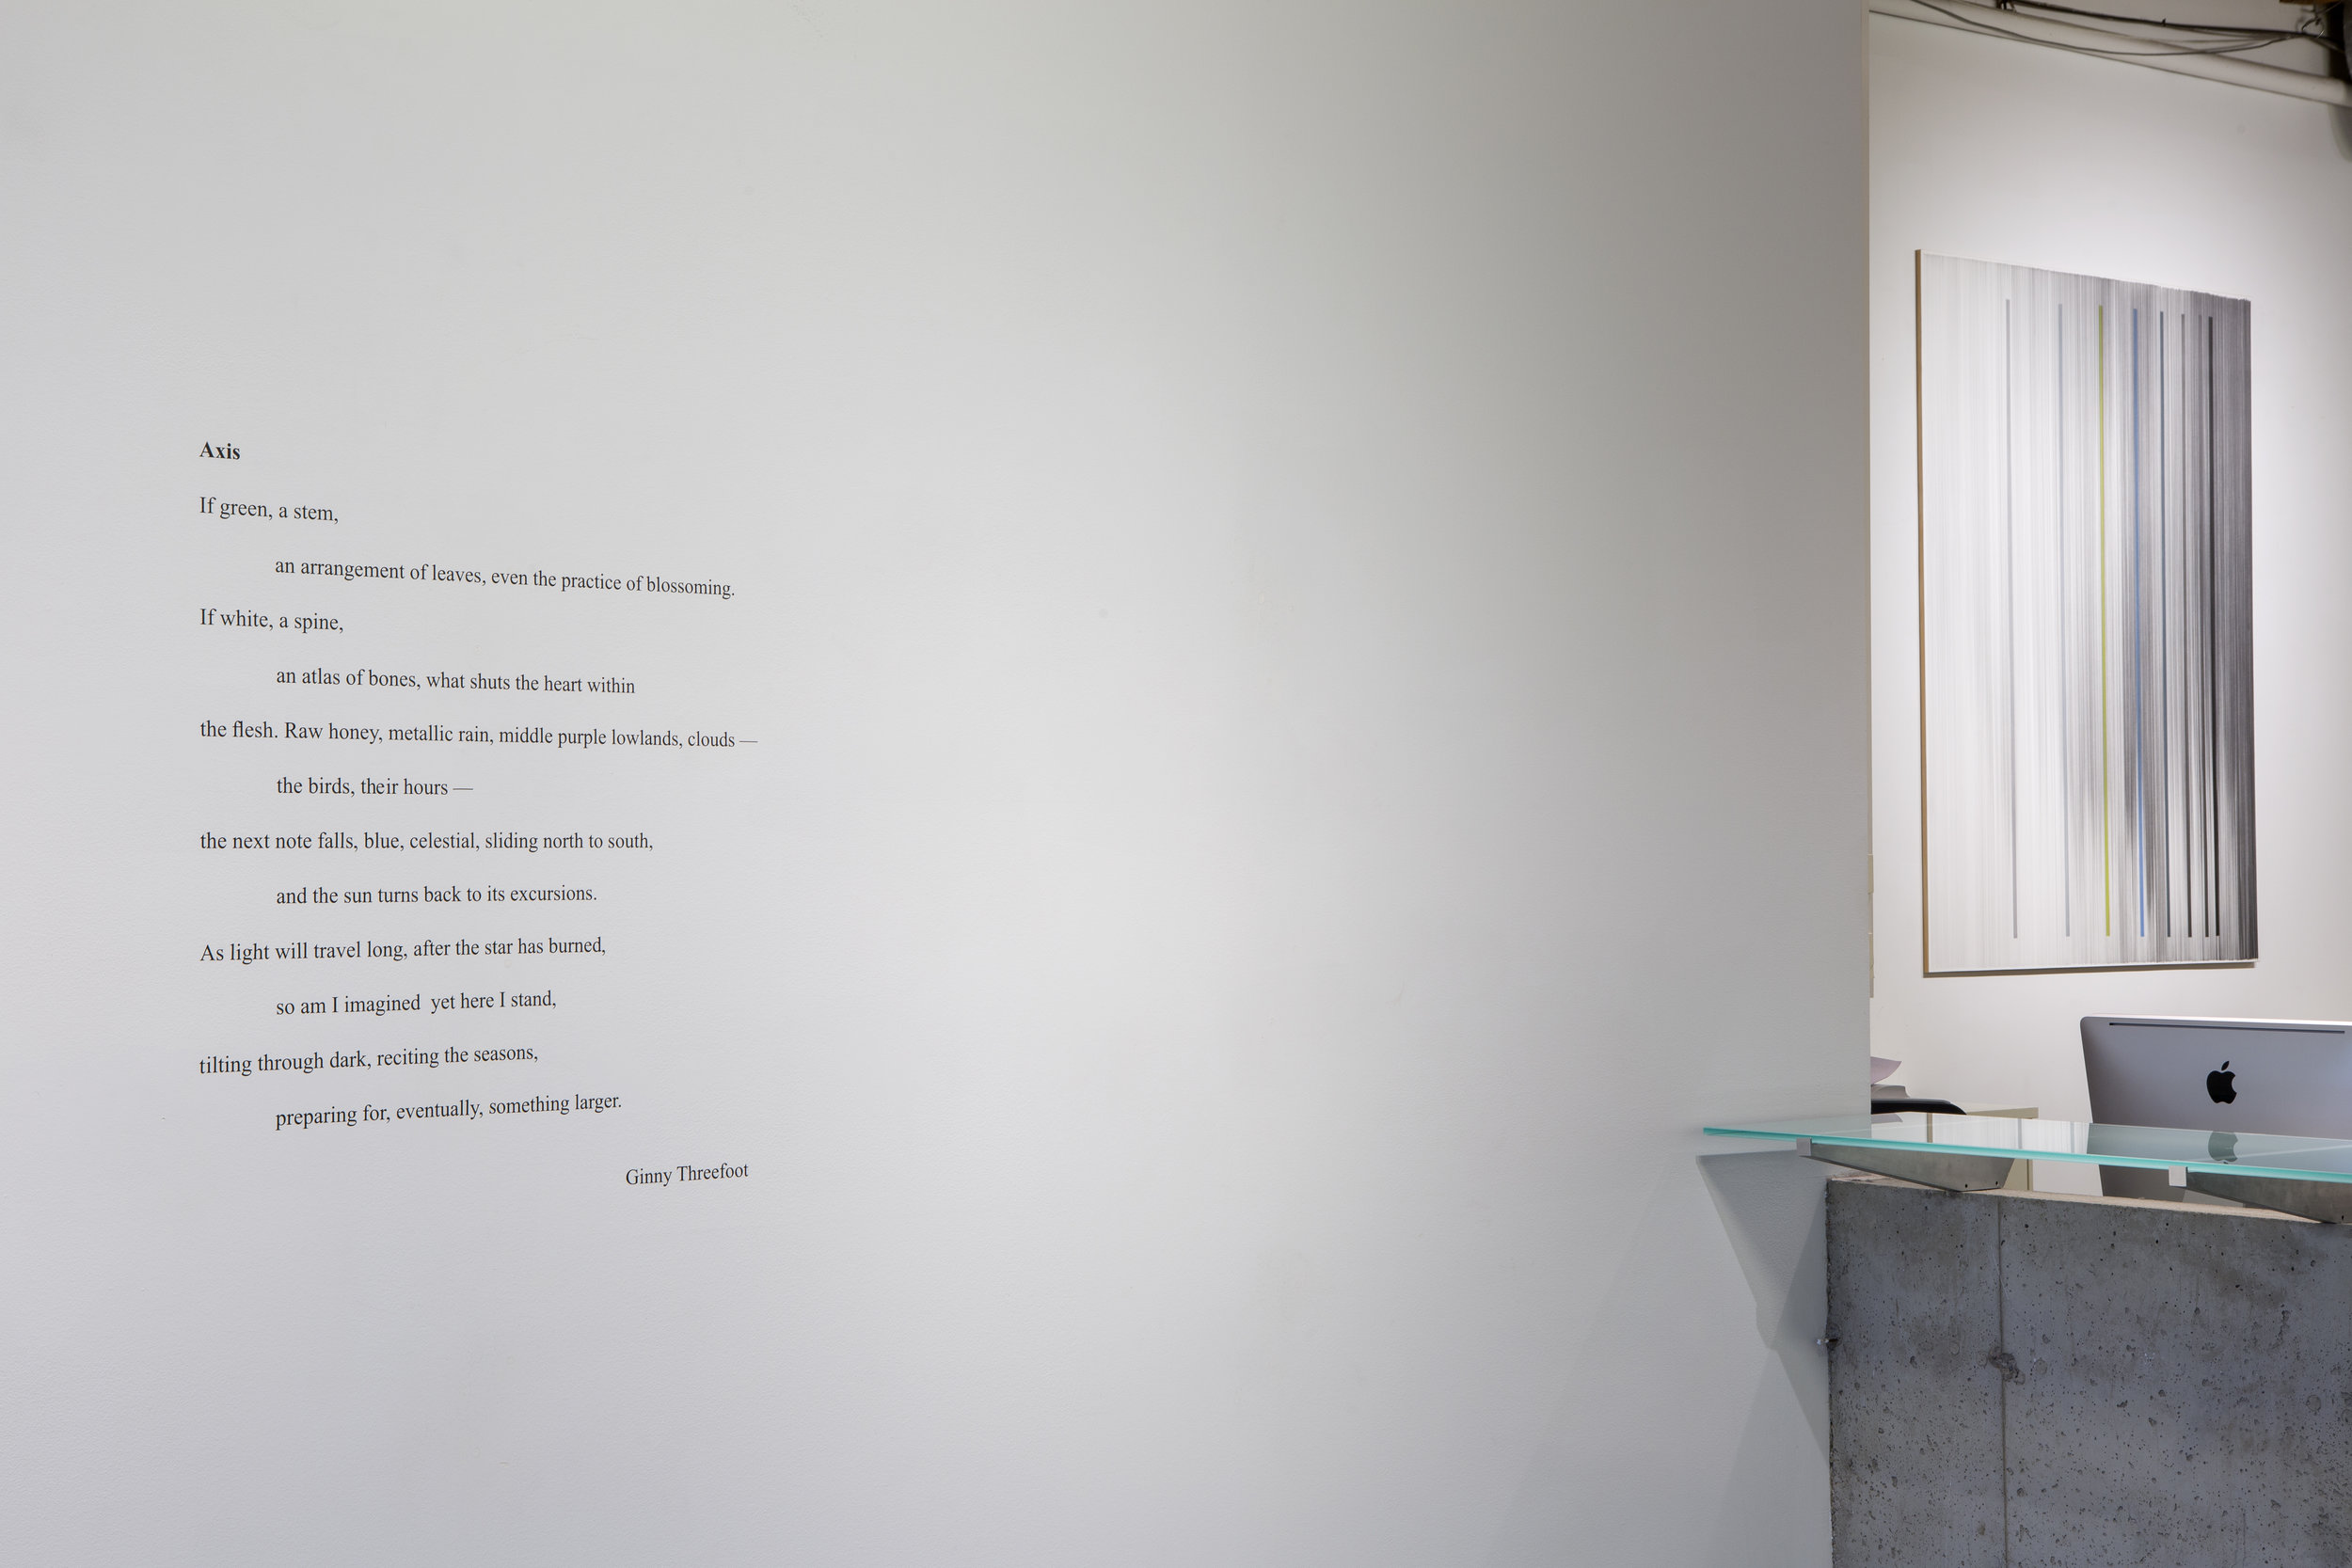  installation view of   Axis   by Ginny Threefoot a poem in response to the exhibition &nbsp; 